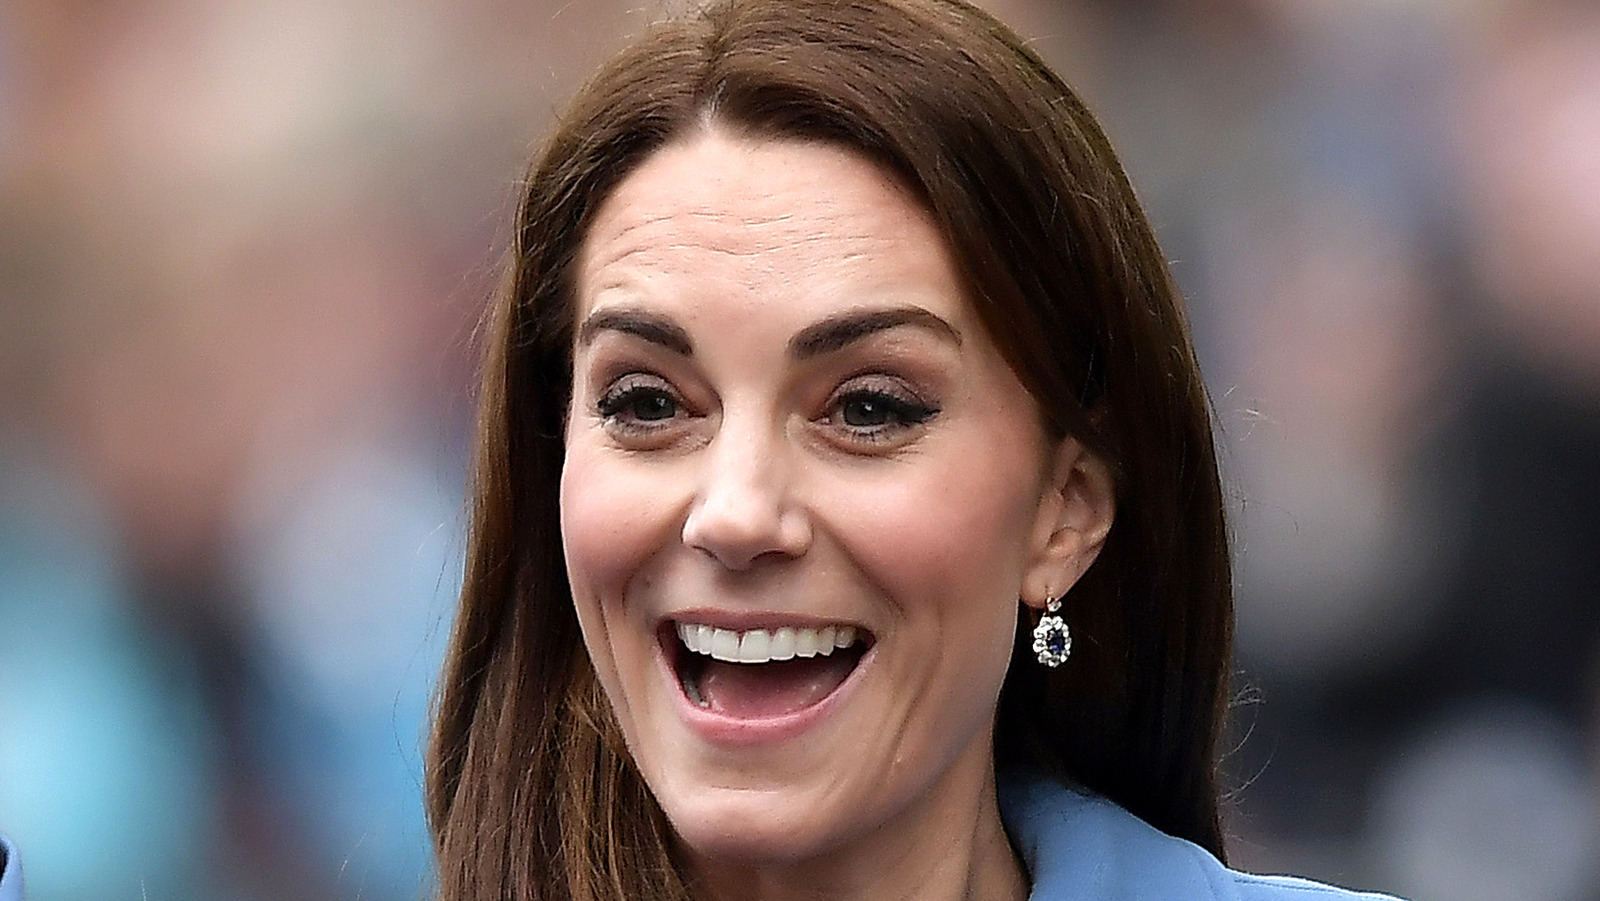 The Earrings Kate Middleton Just Wore Have A Hidden Meaning